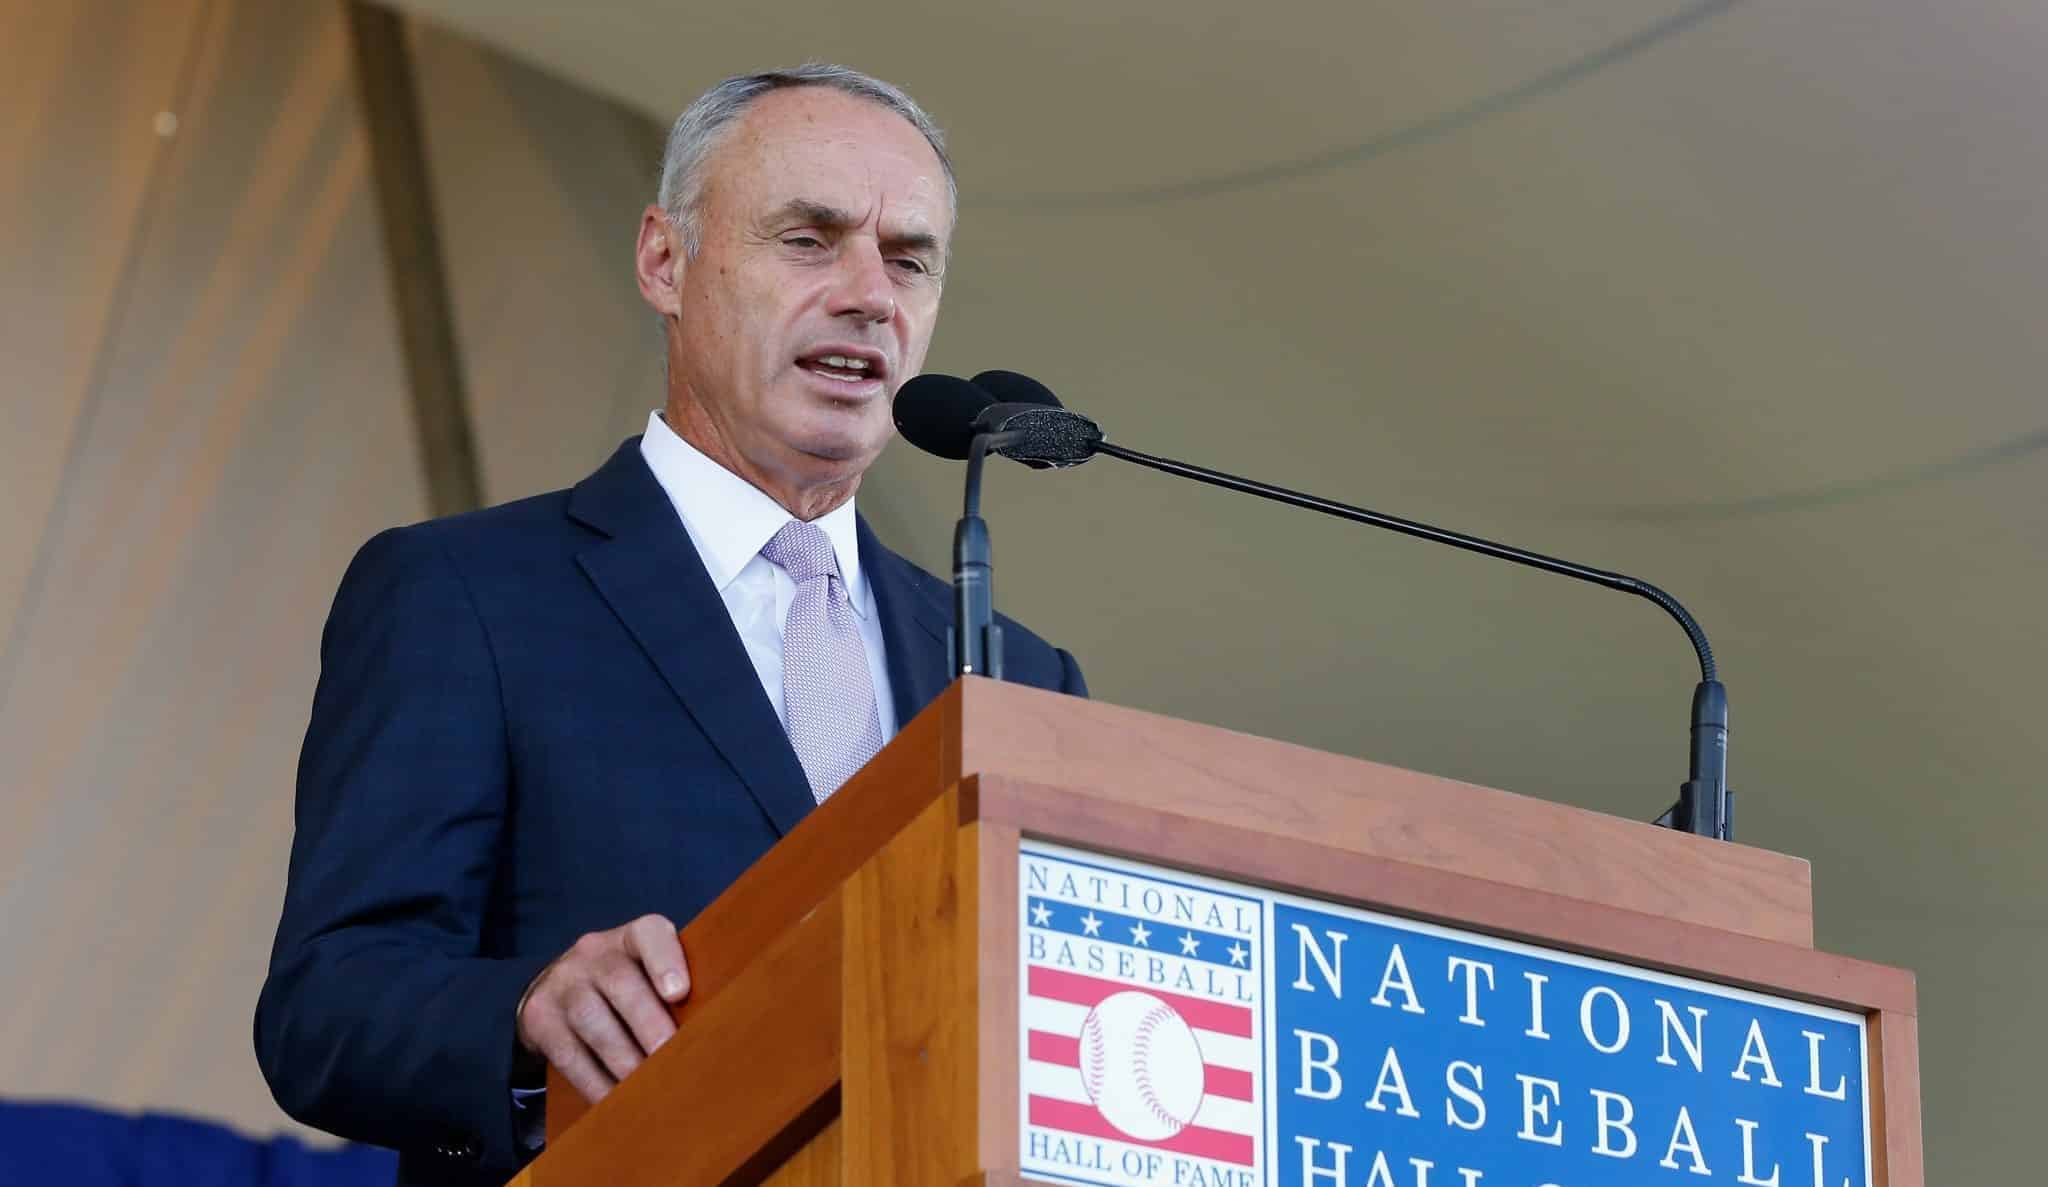 COOPERSTOWN, NY - JULY 29: MLB commissioner Rob Manfred speaks at Clark Sports Center during the Baseball Hall of Fame induction ceremony on July 29, 2018 in Cooperstown, New York.